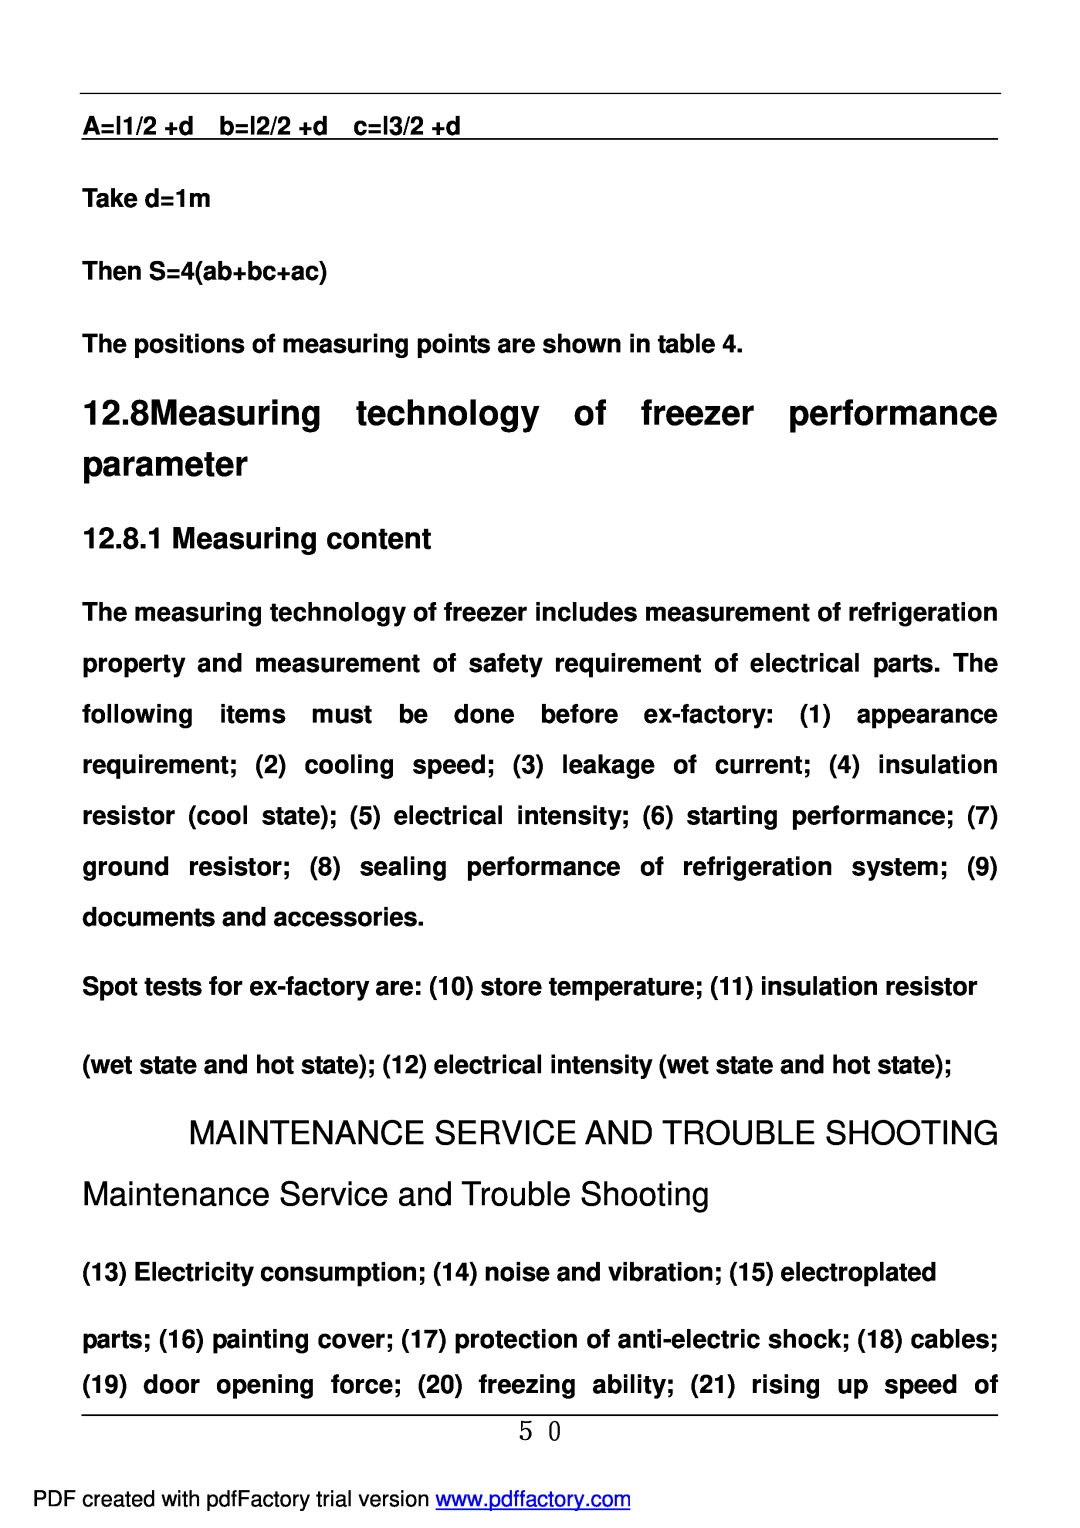 Haier BD-478A 12.8Measuring technology of freezer performance parameter, Maintenance Service And Trouble Shooting 